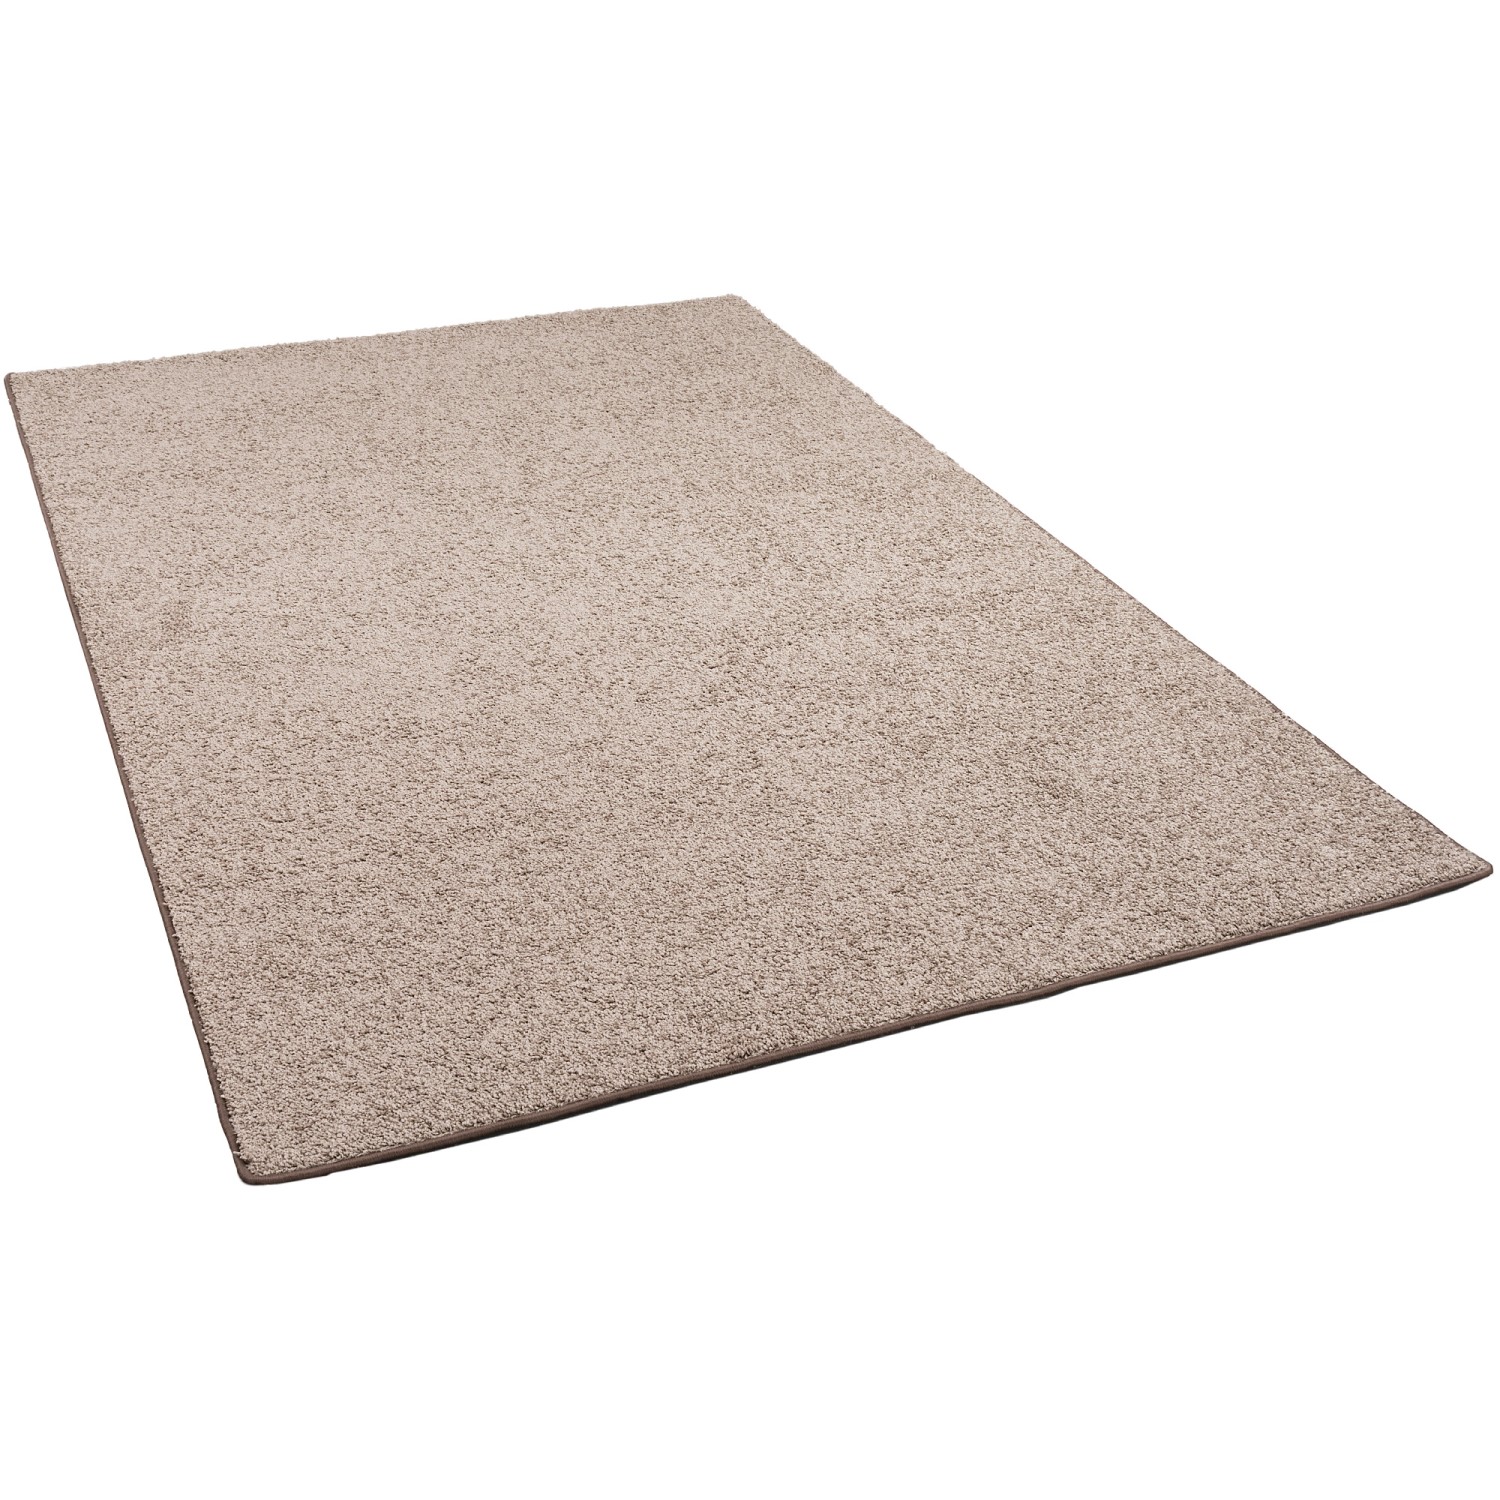 Snapstyle Hochflor Velours Teppich Mona Taupe 80x240cm